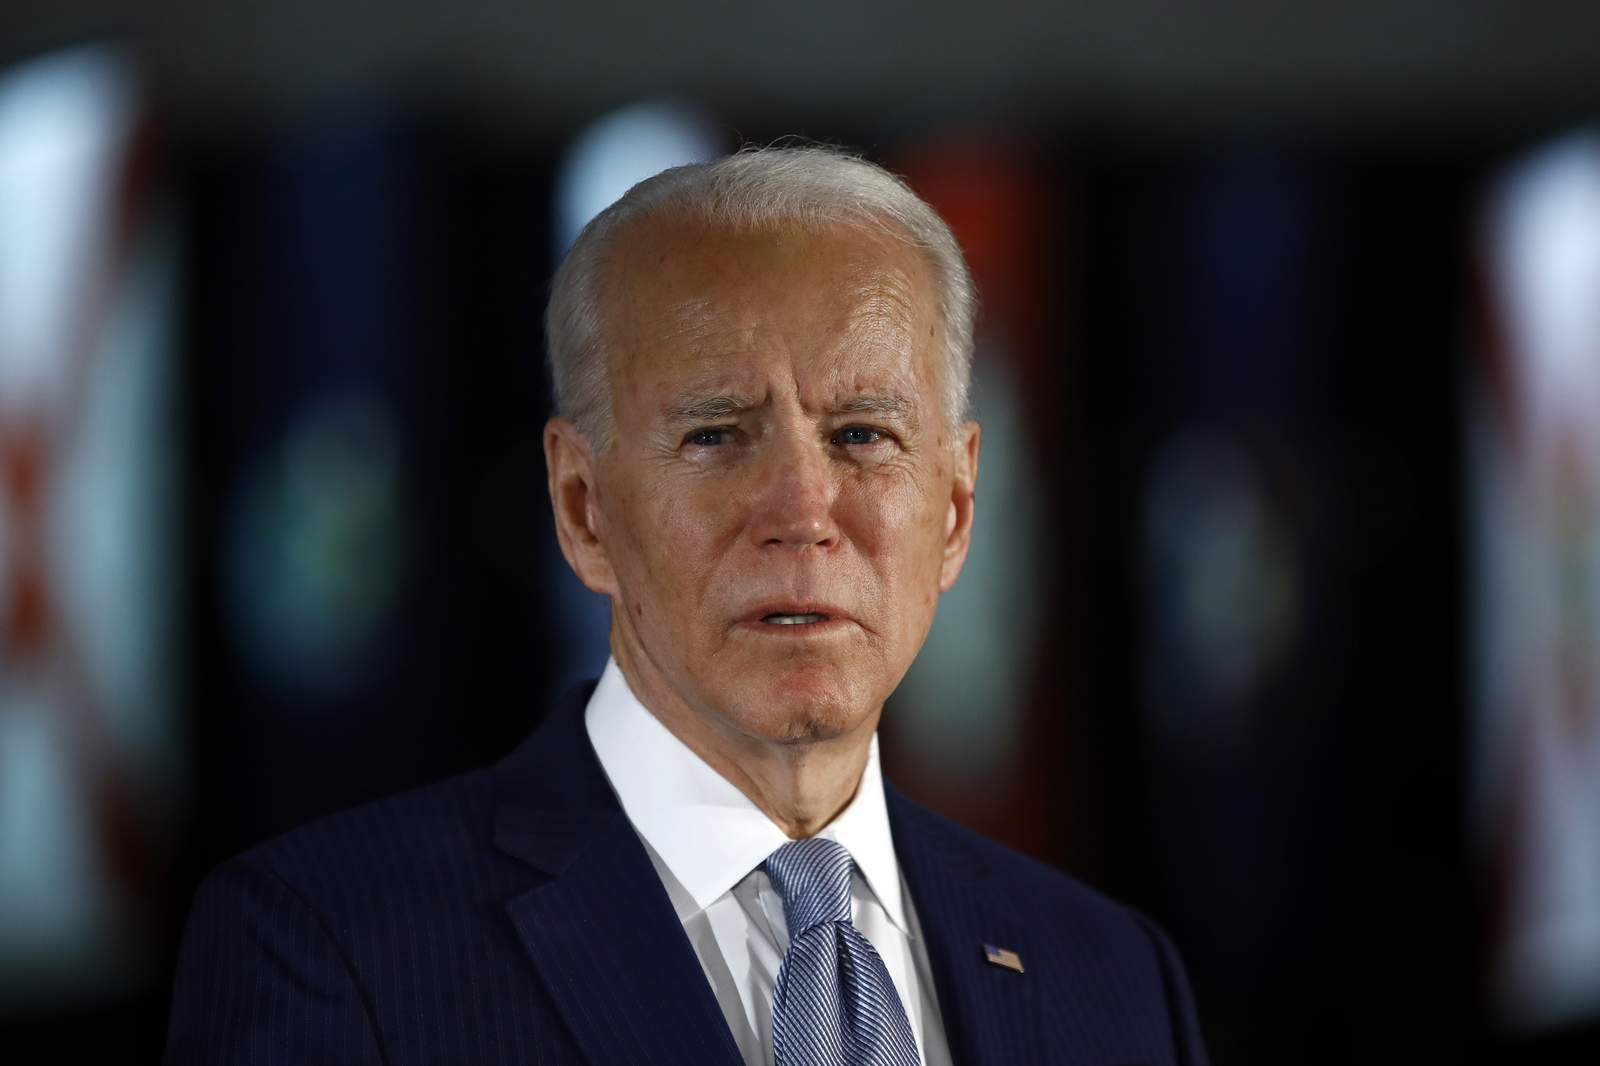 Civil unrest could influence Biden's search for running mate